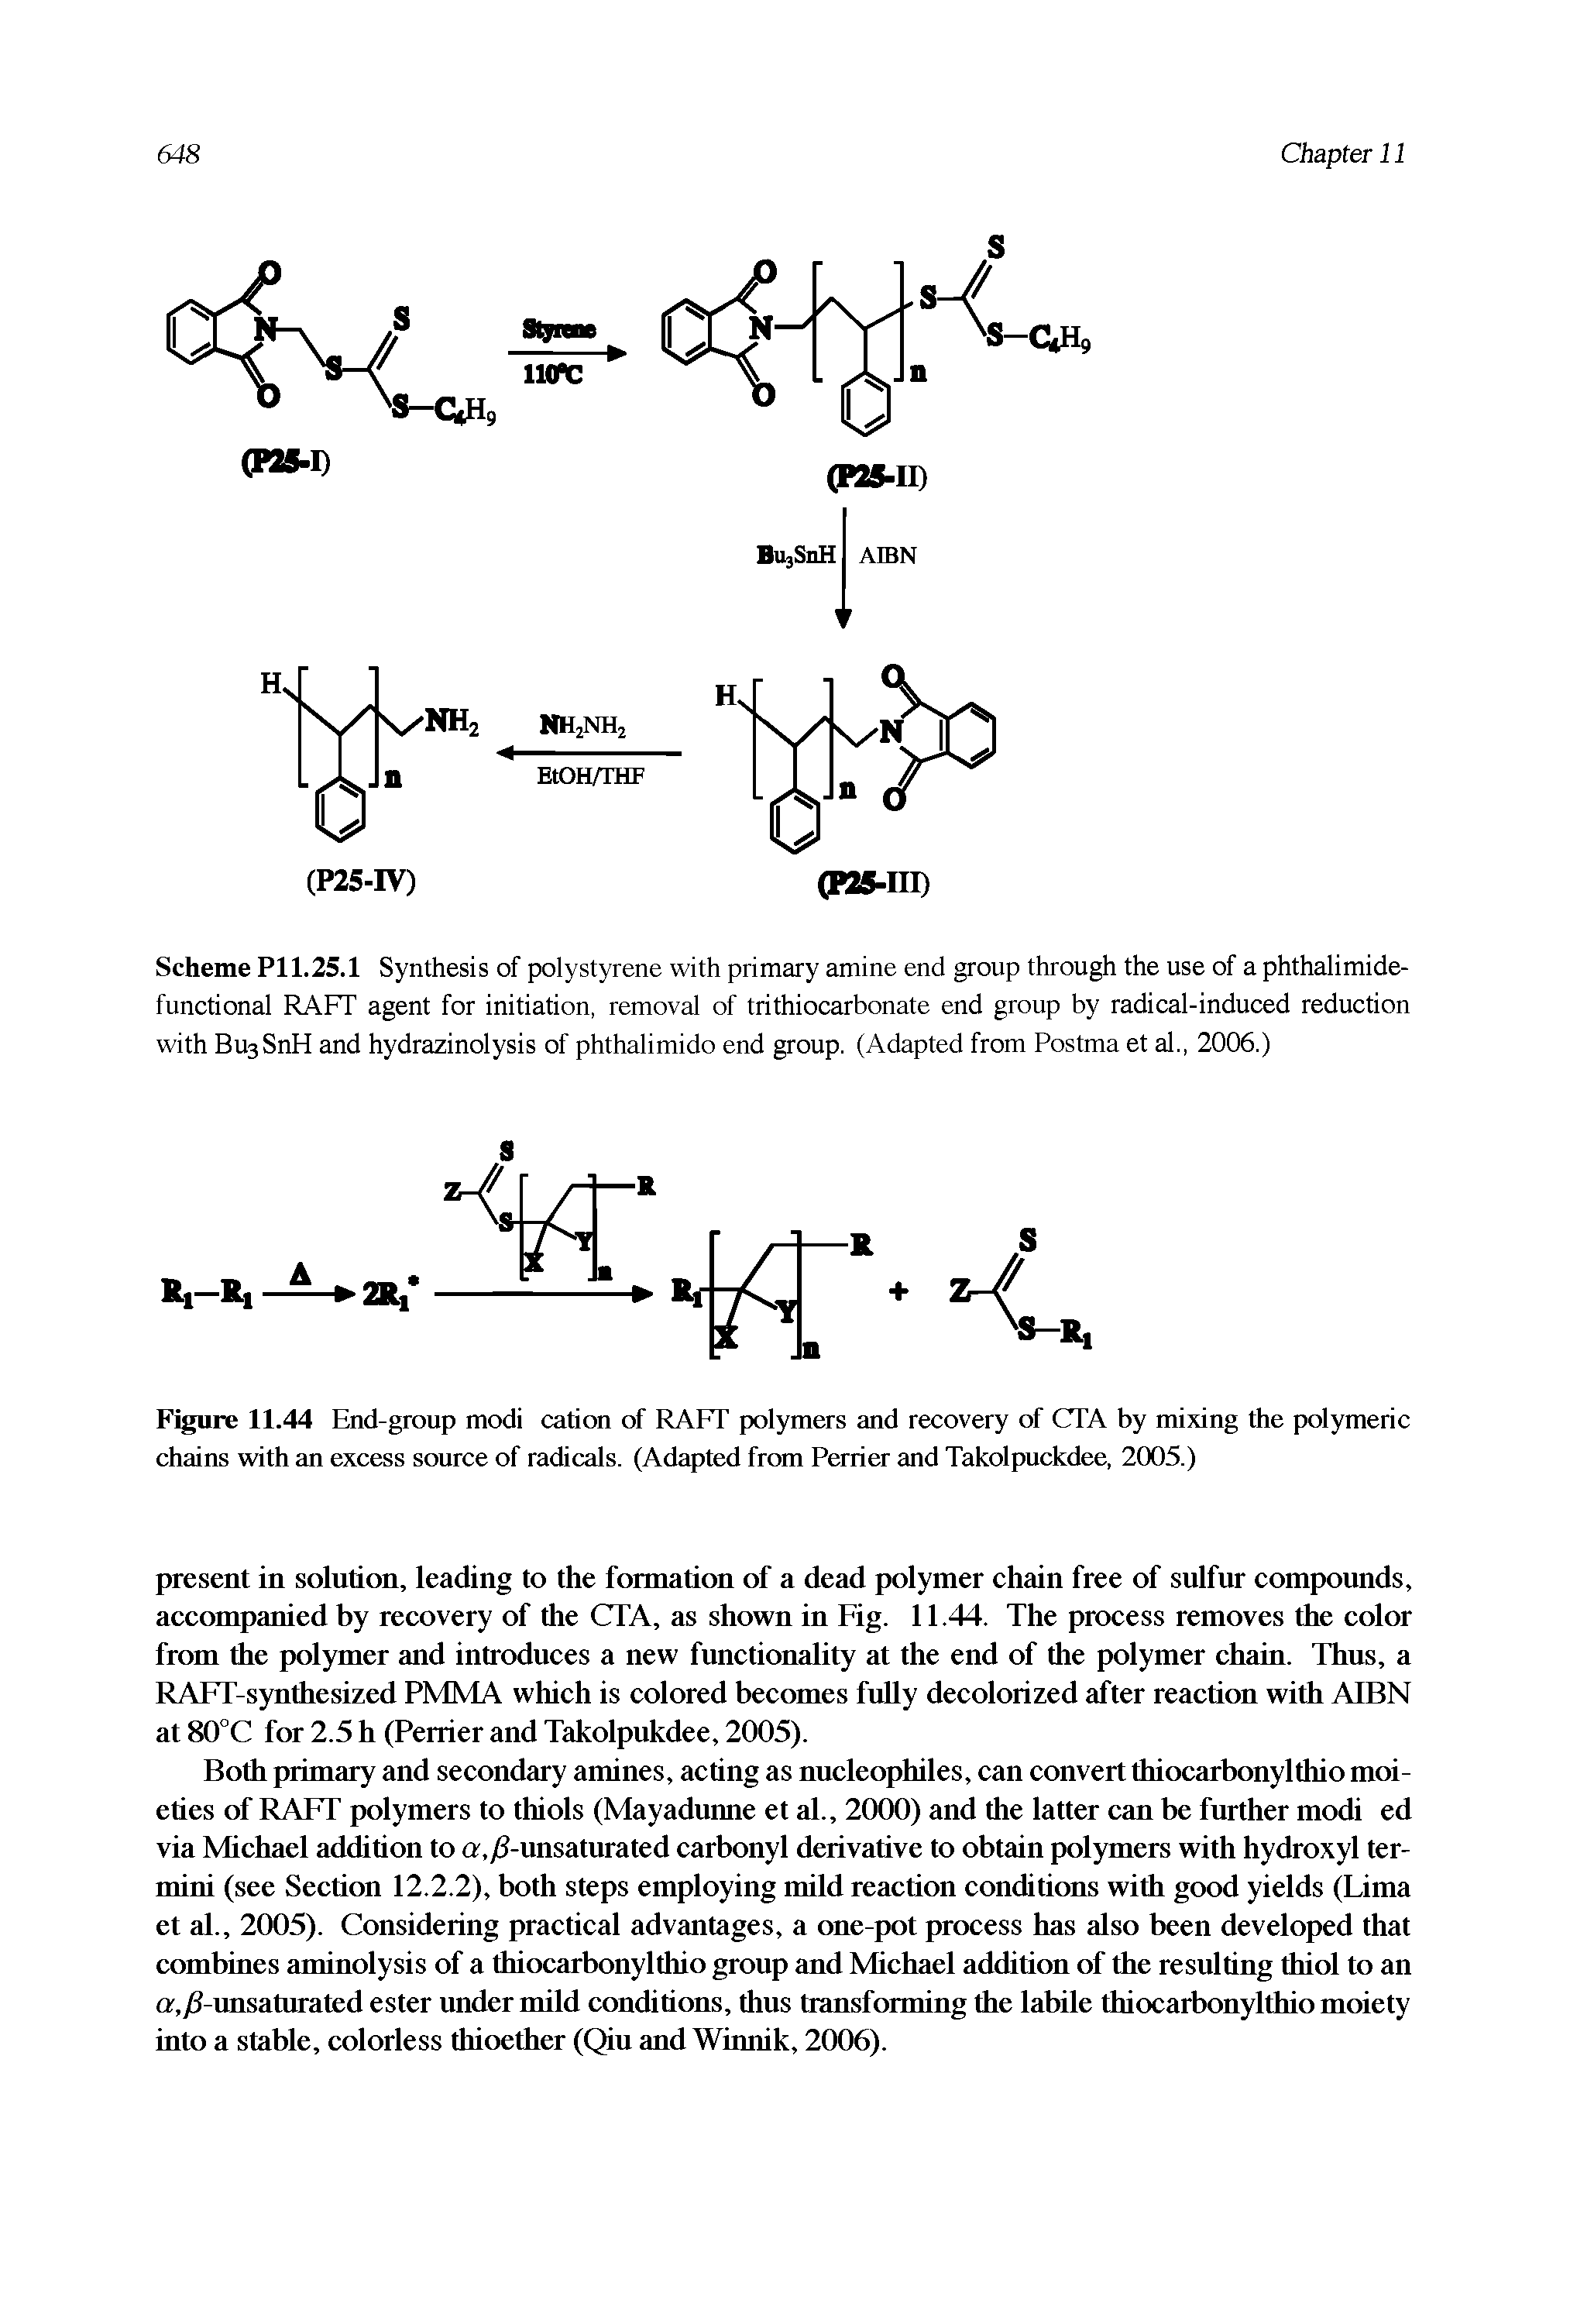 Scheme Pll.25.1 Synthesis of polystyrene with primary amine end group through the use of a phthalimide-functional RAFT agent for initiation, removal of trithiocarbonate end group by radical-induced reduction with BusSnH and hydrazinolysis of phthalimido end group. (Adapted from Postma et al., 2006.)...